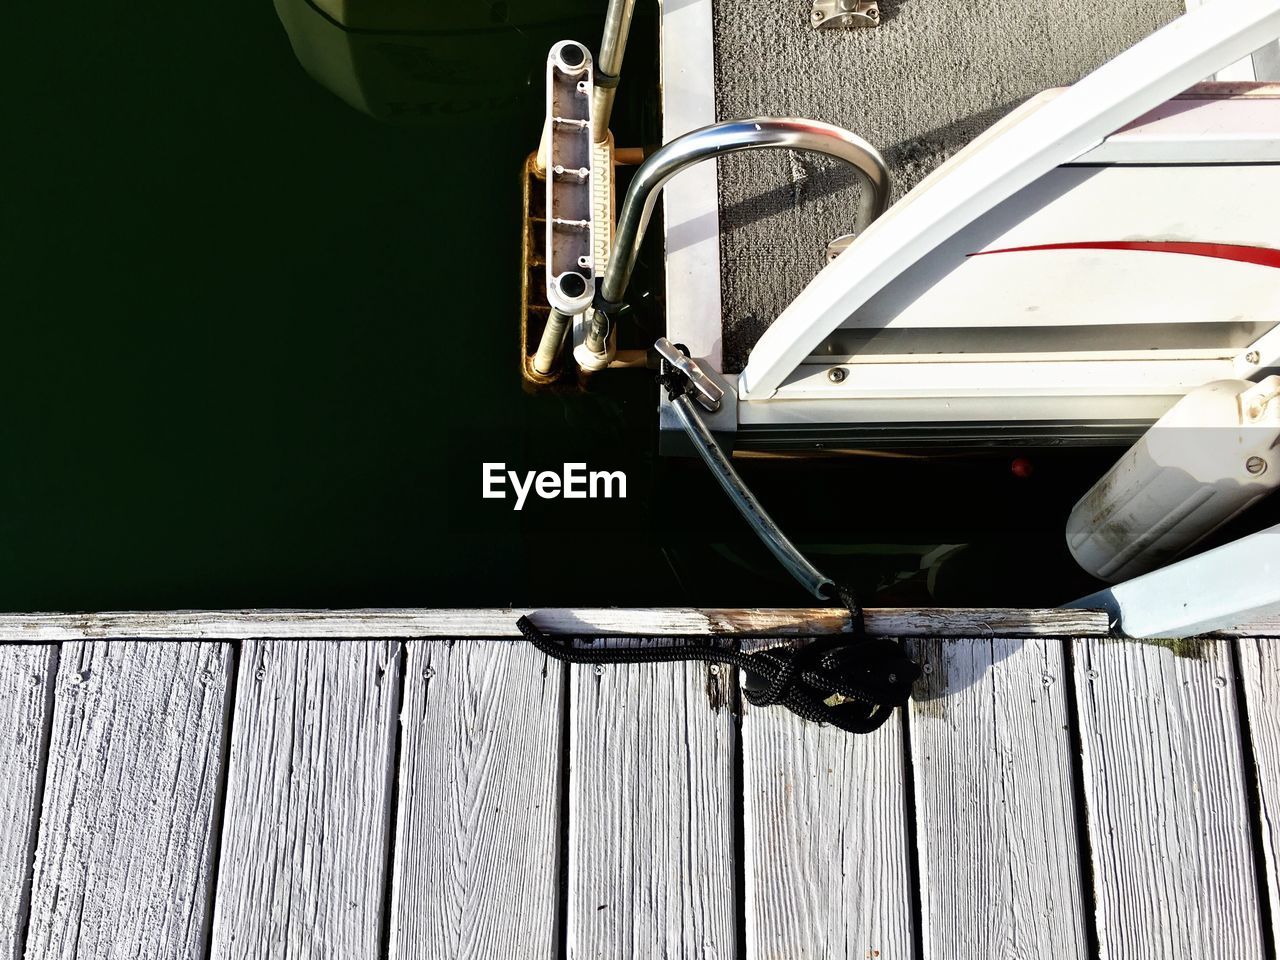 Cropped image of boat tied to jetty